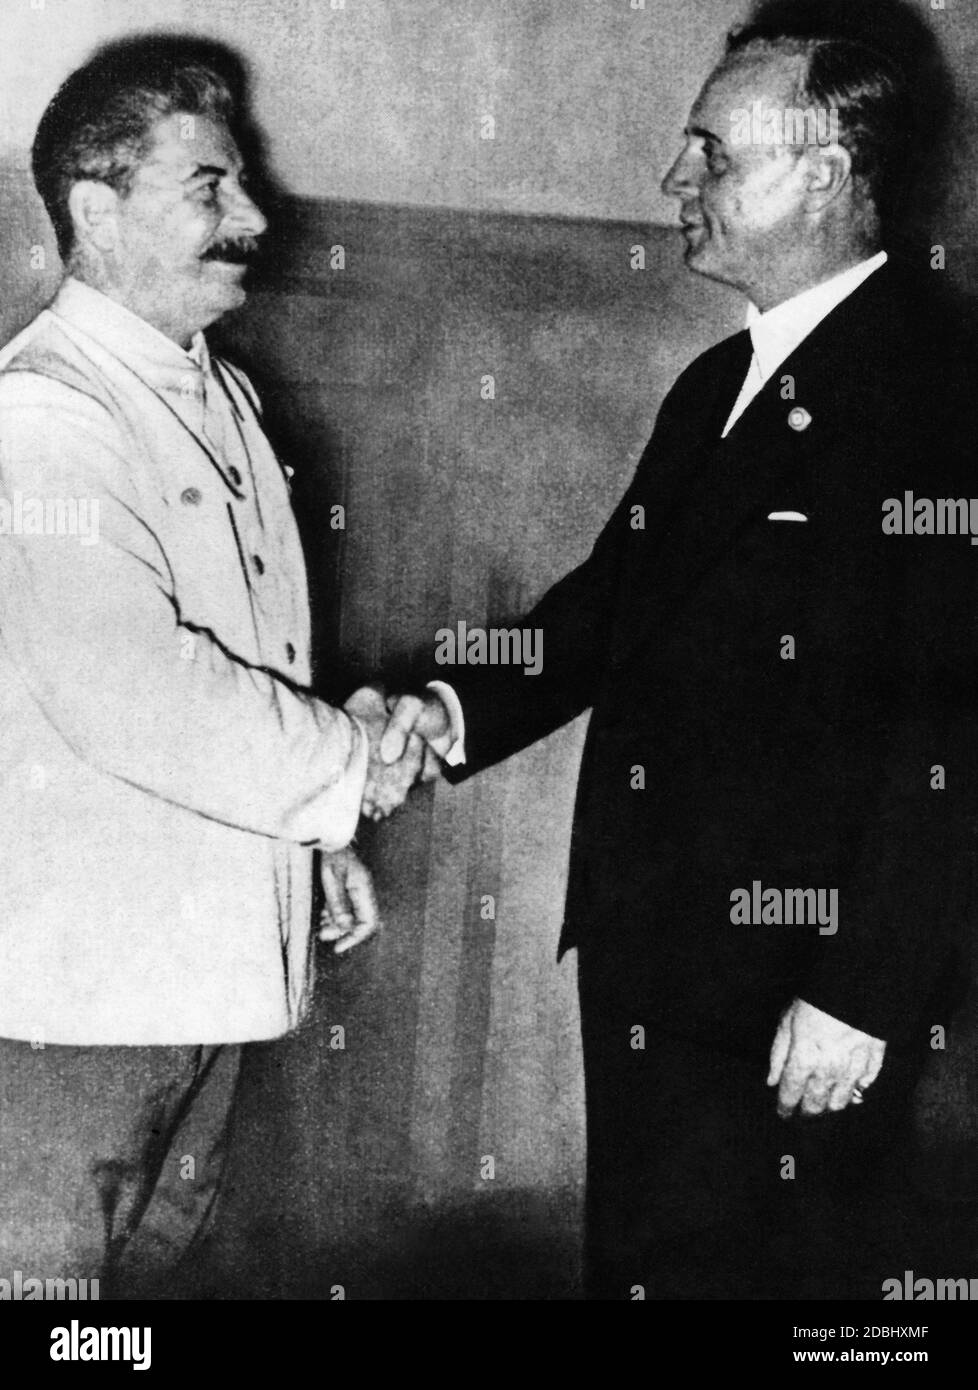 Joseph W. Stalin and Joachim Ribbentrop after the signing of the German-Soviet Nonaggression Pact. In a secret additional protocol, the two powers divided Poland and the Baltic countries among themselves. Stock Photo